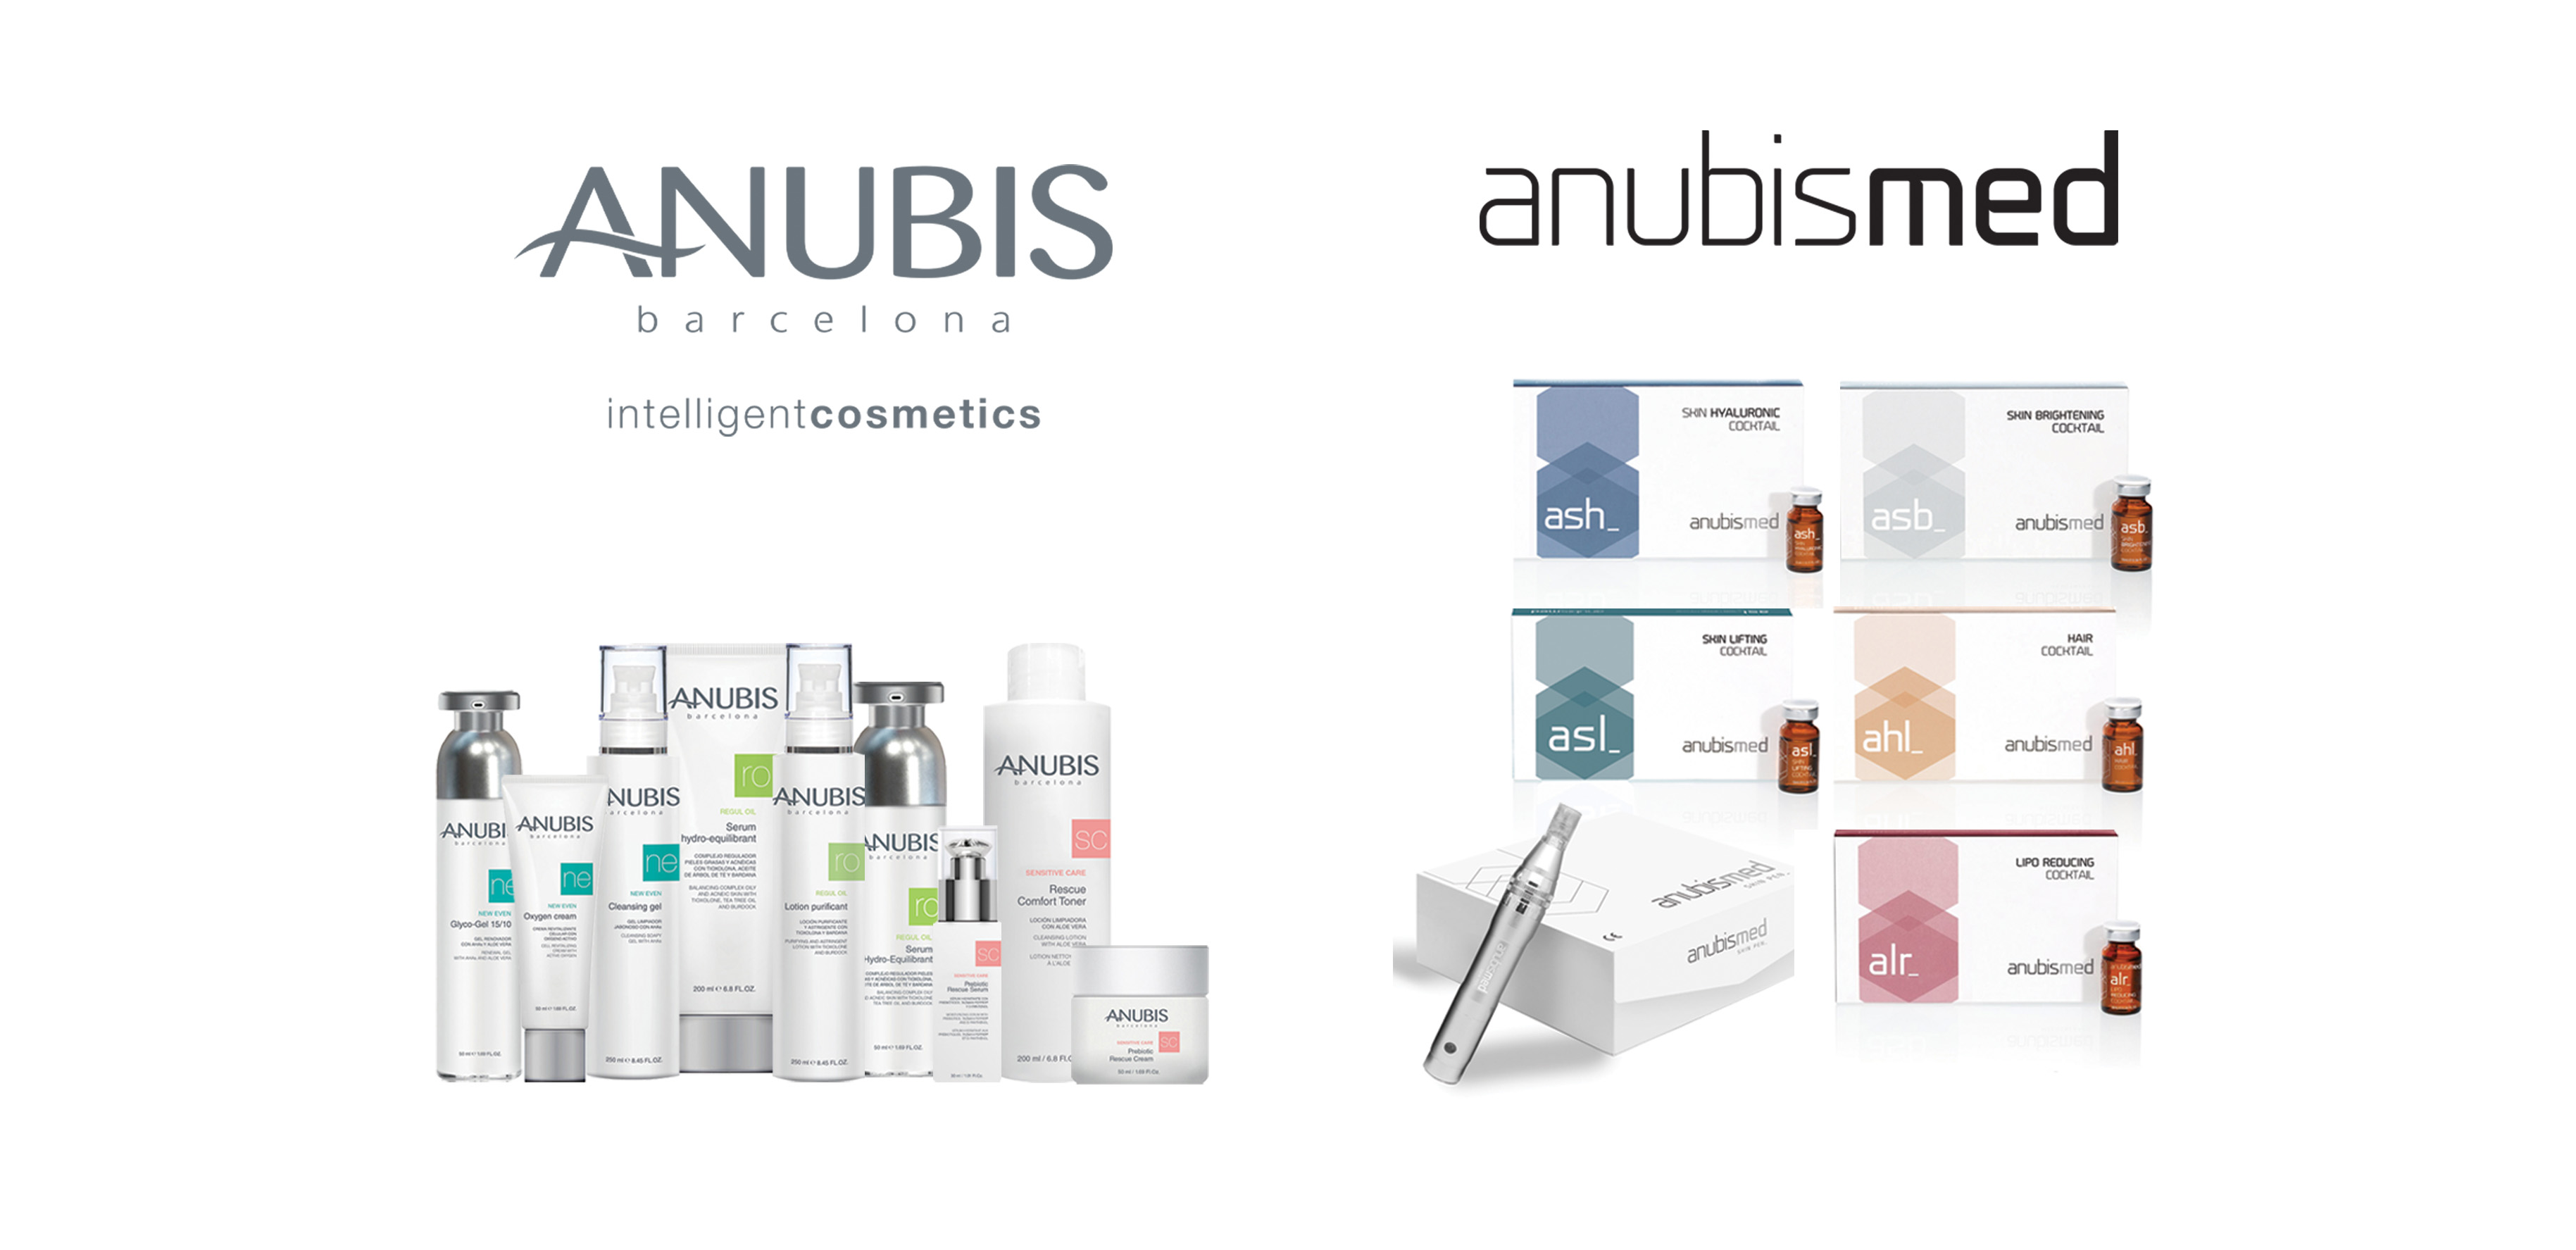 Anubis Barcelona at a conference in Warsaw dedicated to the problem of Acne.